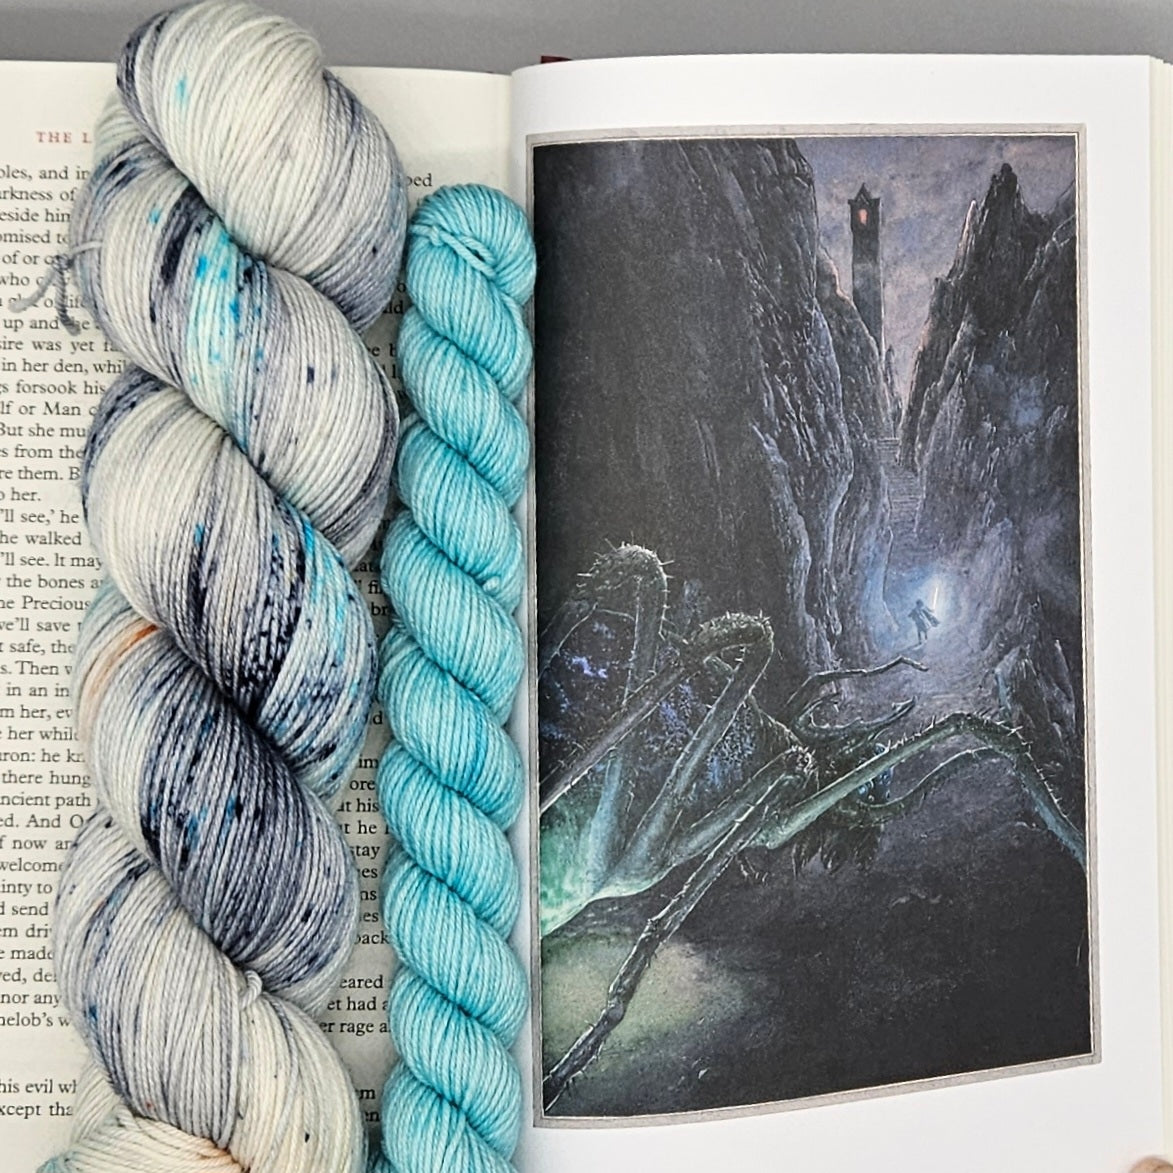 A Light In The Darkness When All Other Lights Go Out - Merino Nylon 4ply